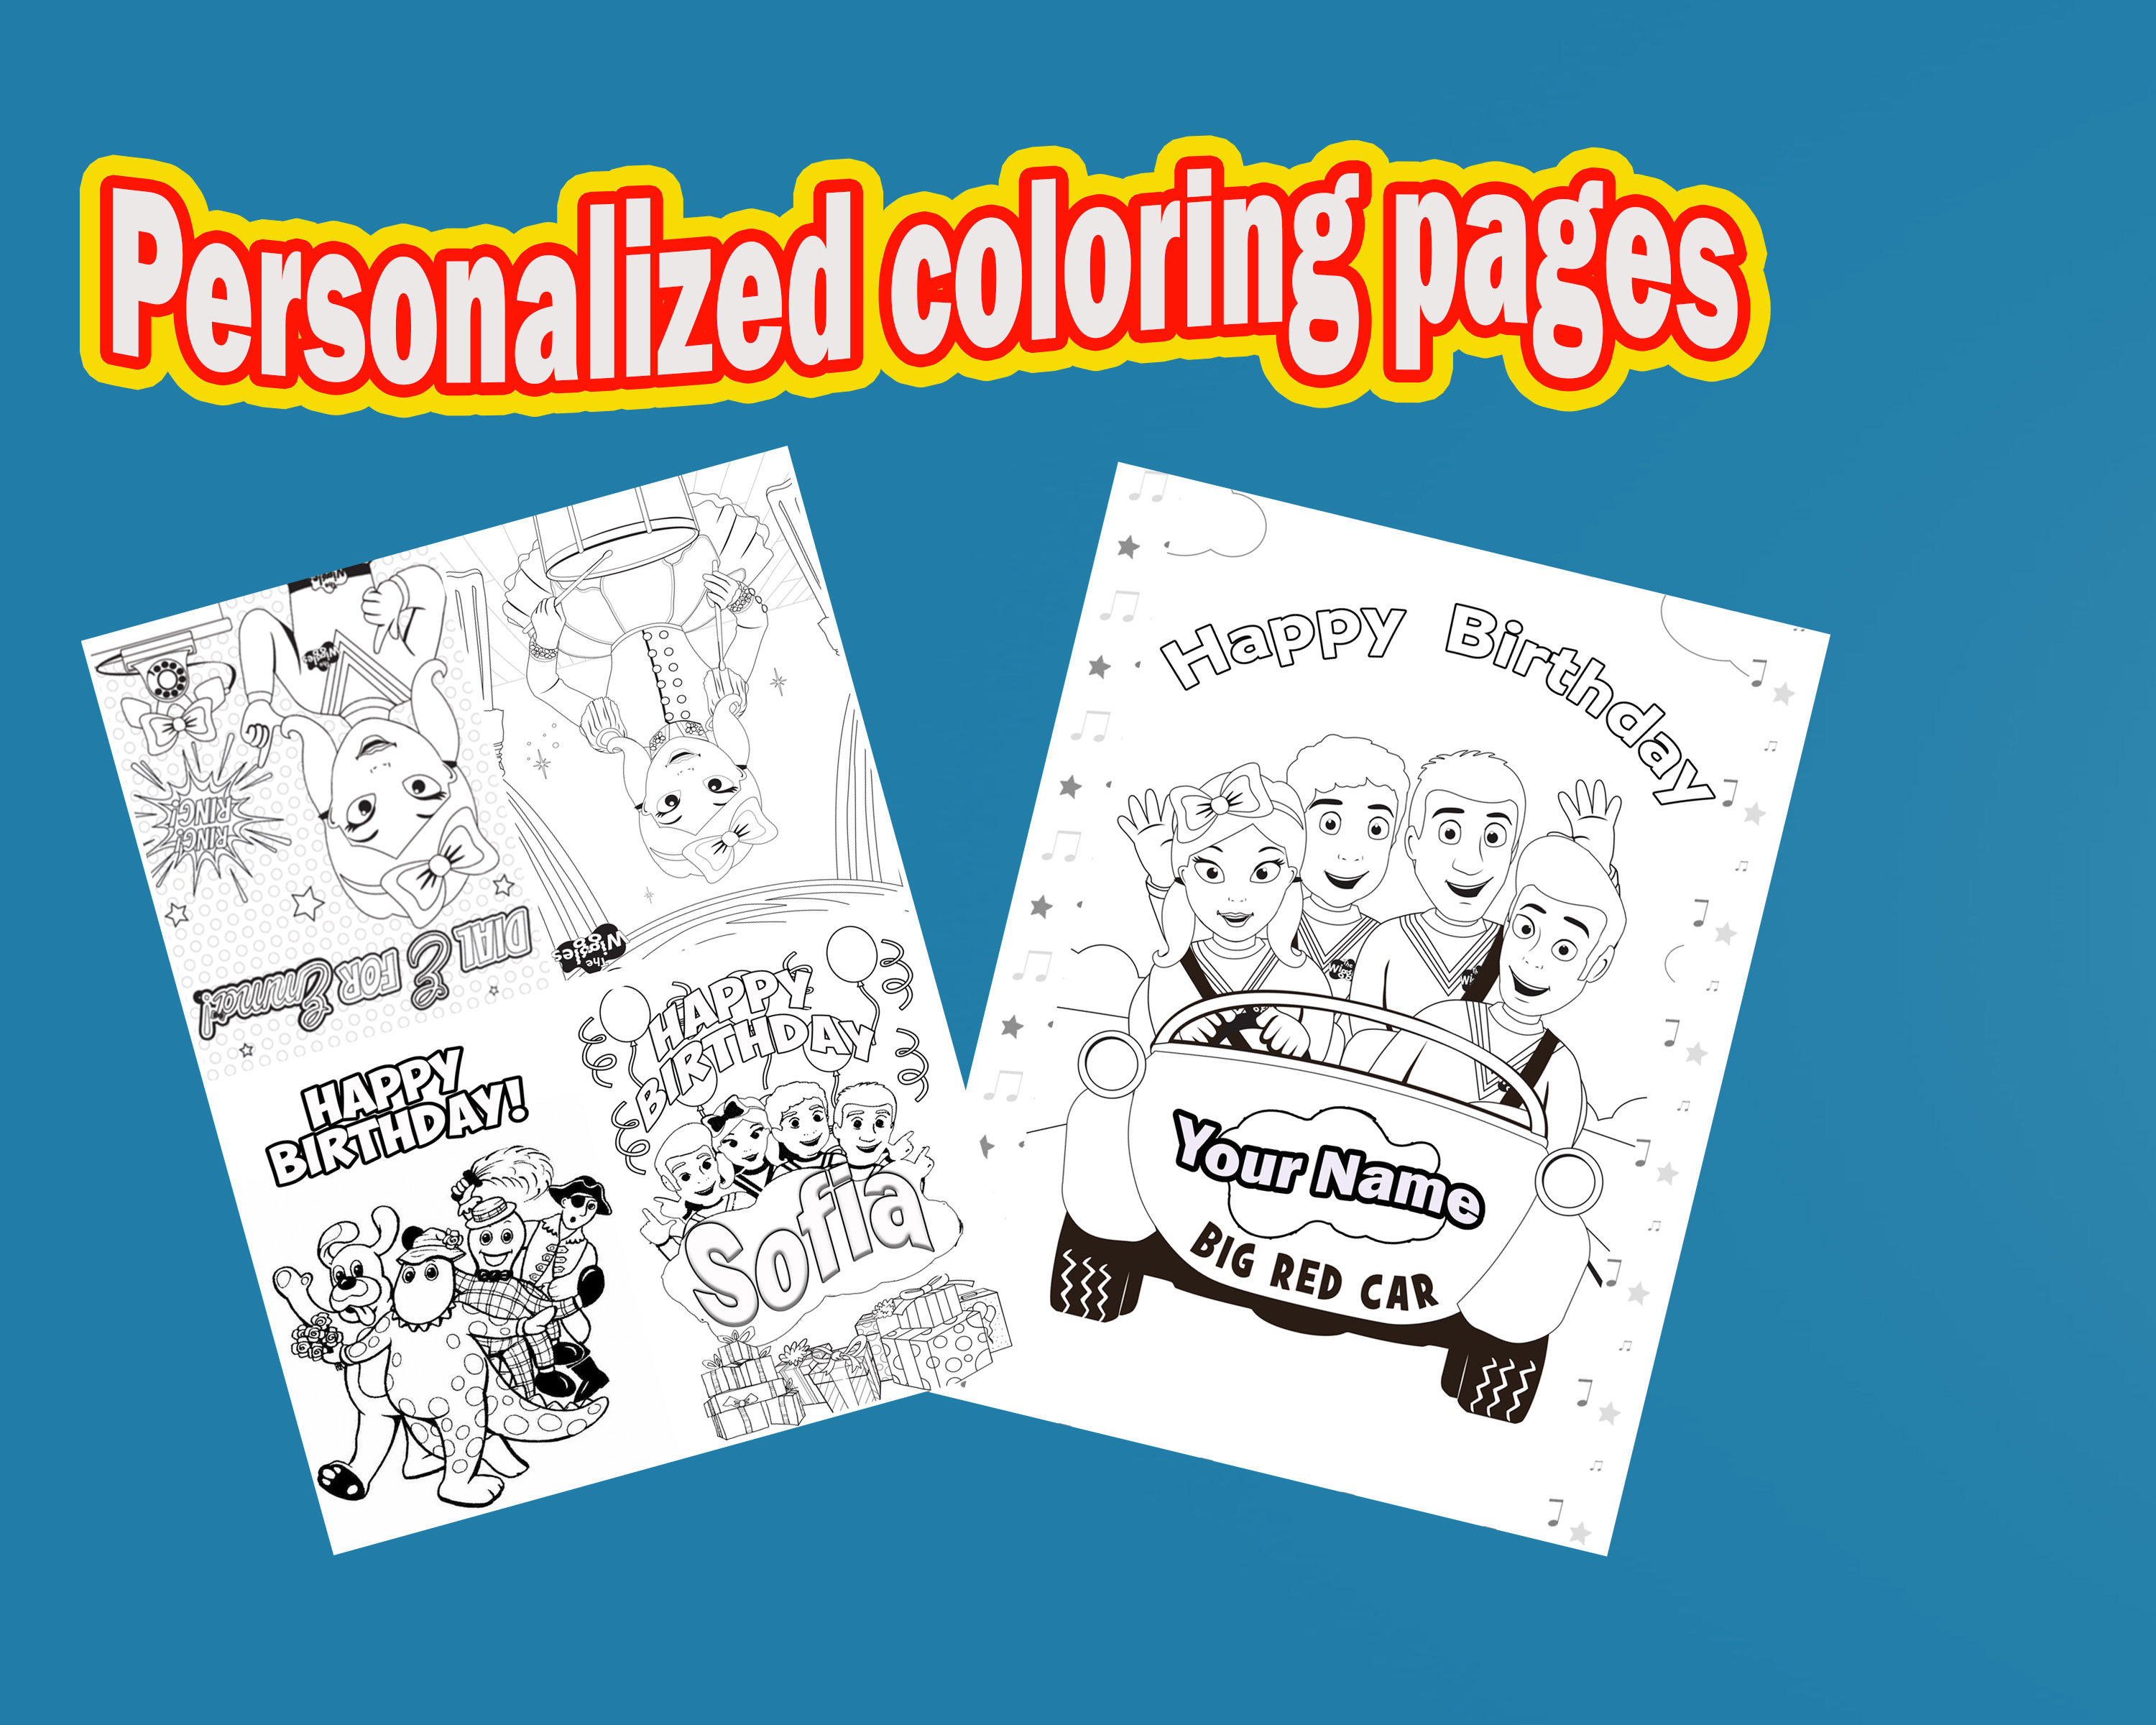 Customized Coloring Pages Coloring Pages Personalized Coloring Pages Wedding Colouringd With